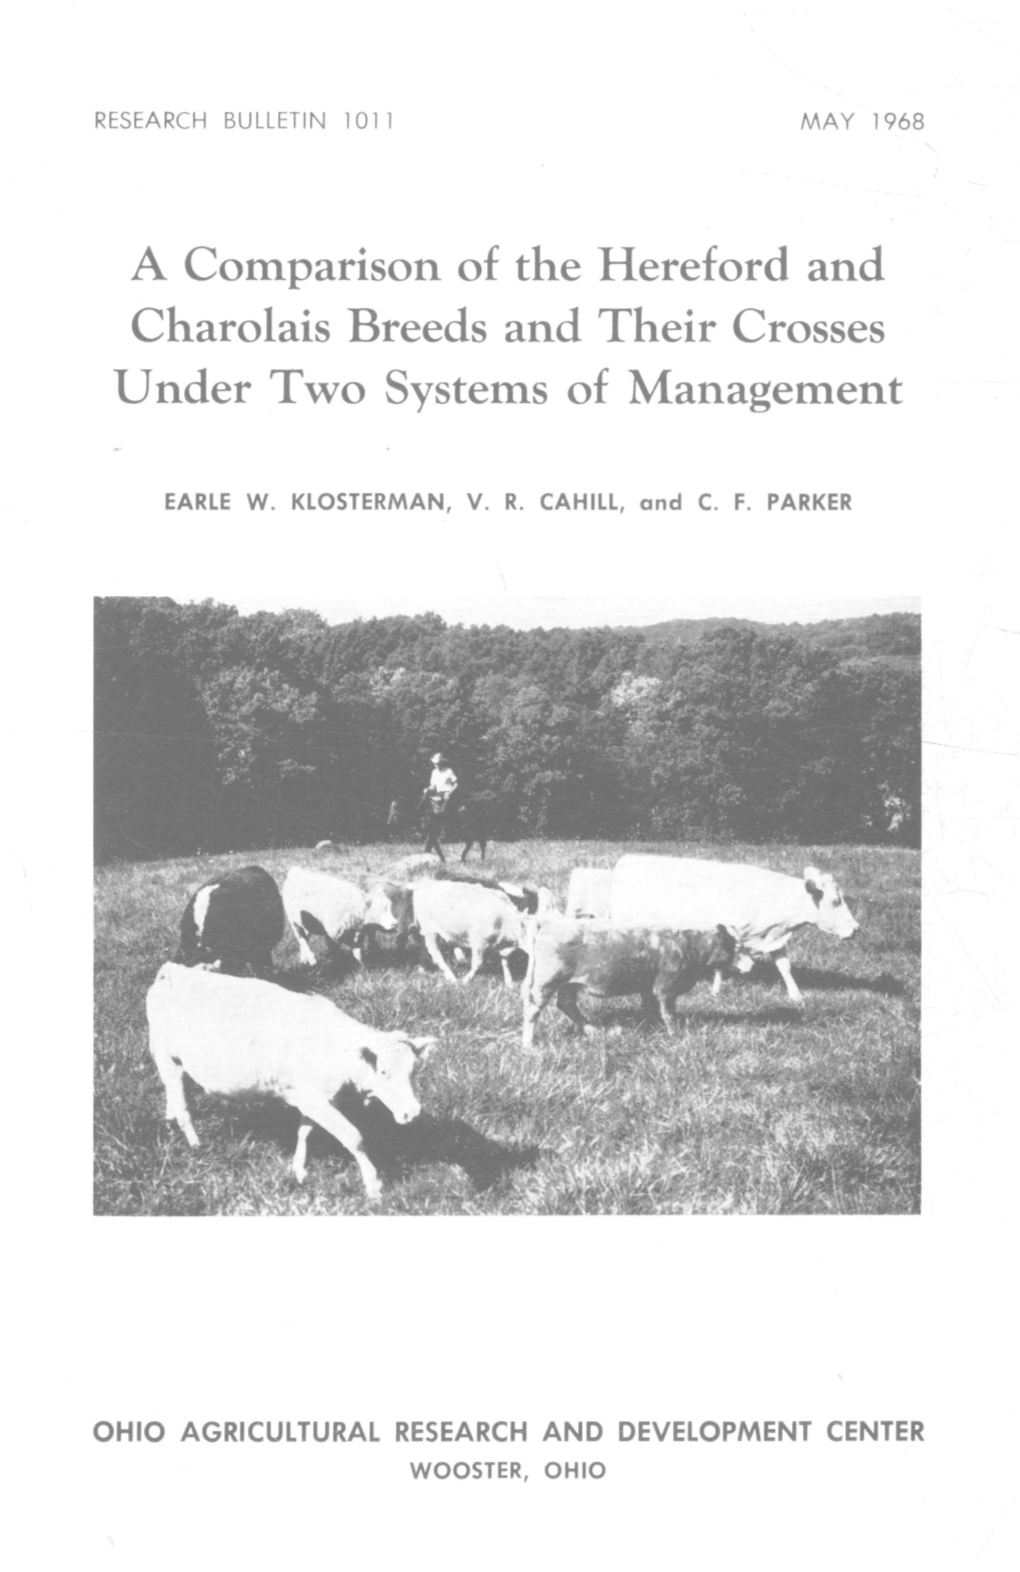 A Comparison of the Hereford and Charolais Breeds and Their Crosses Under Two Systems of Management